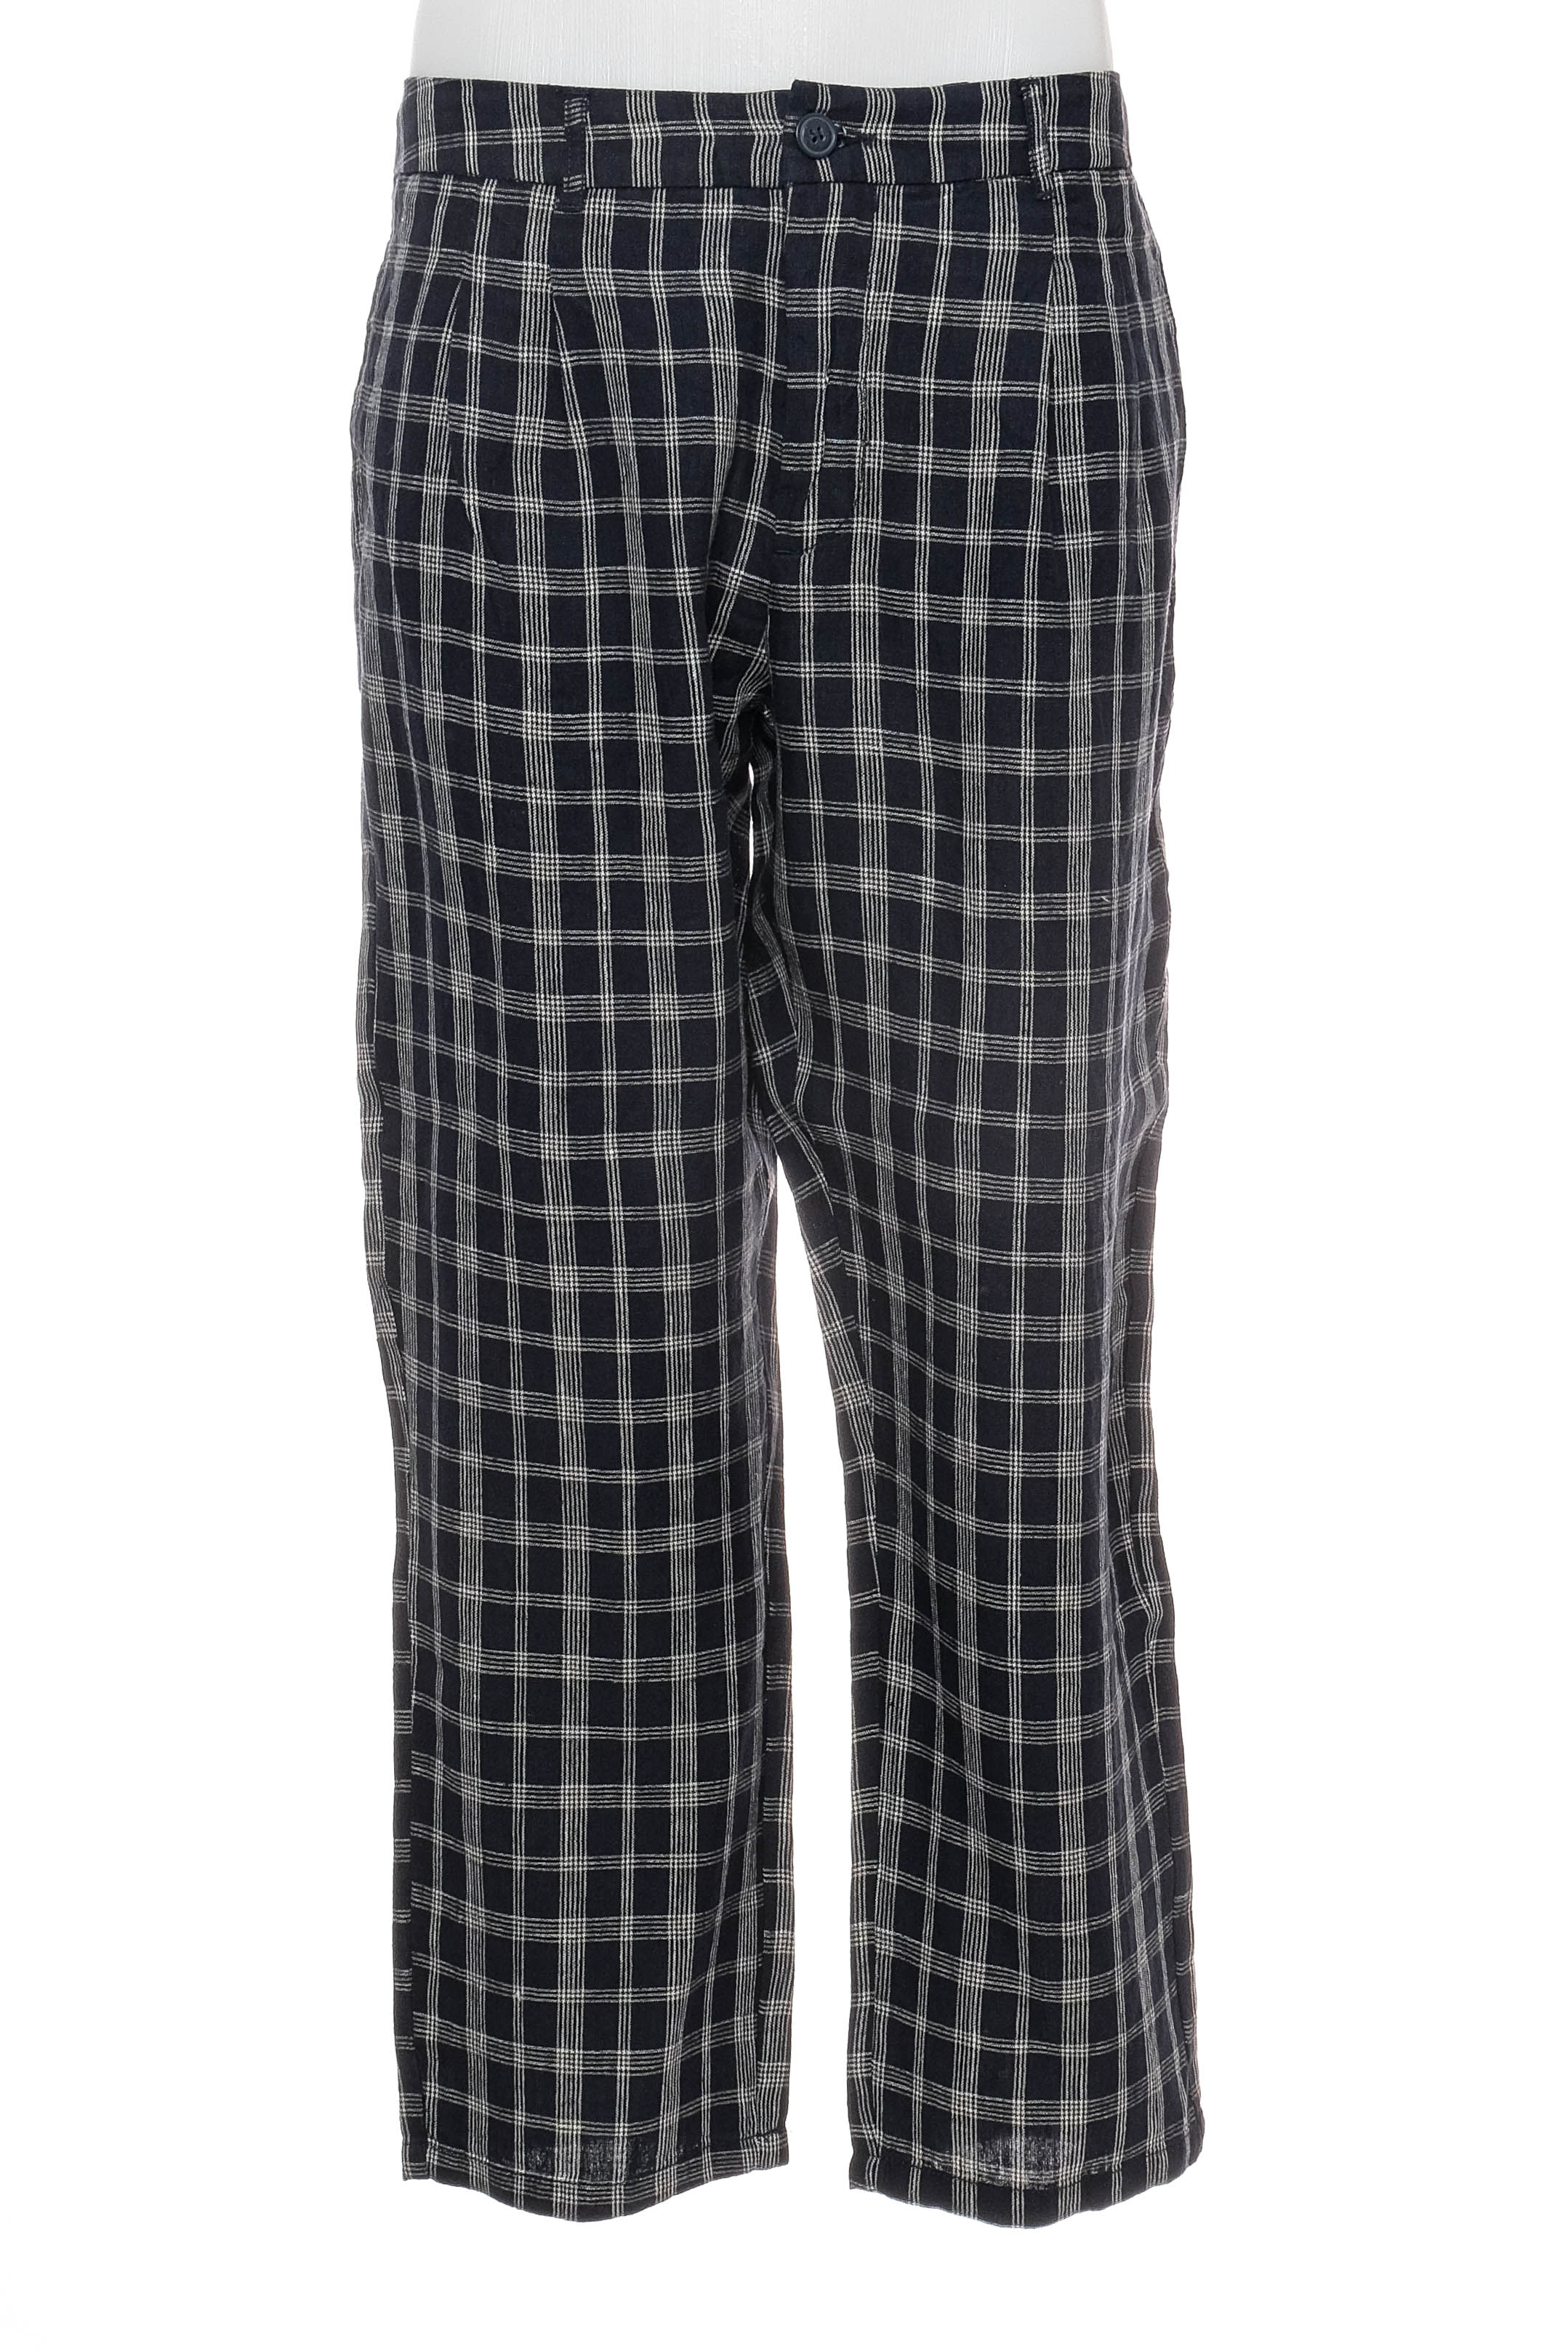 Men's trousers - Pepe Jeans - 0